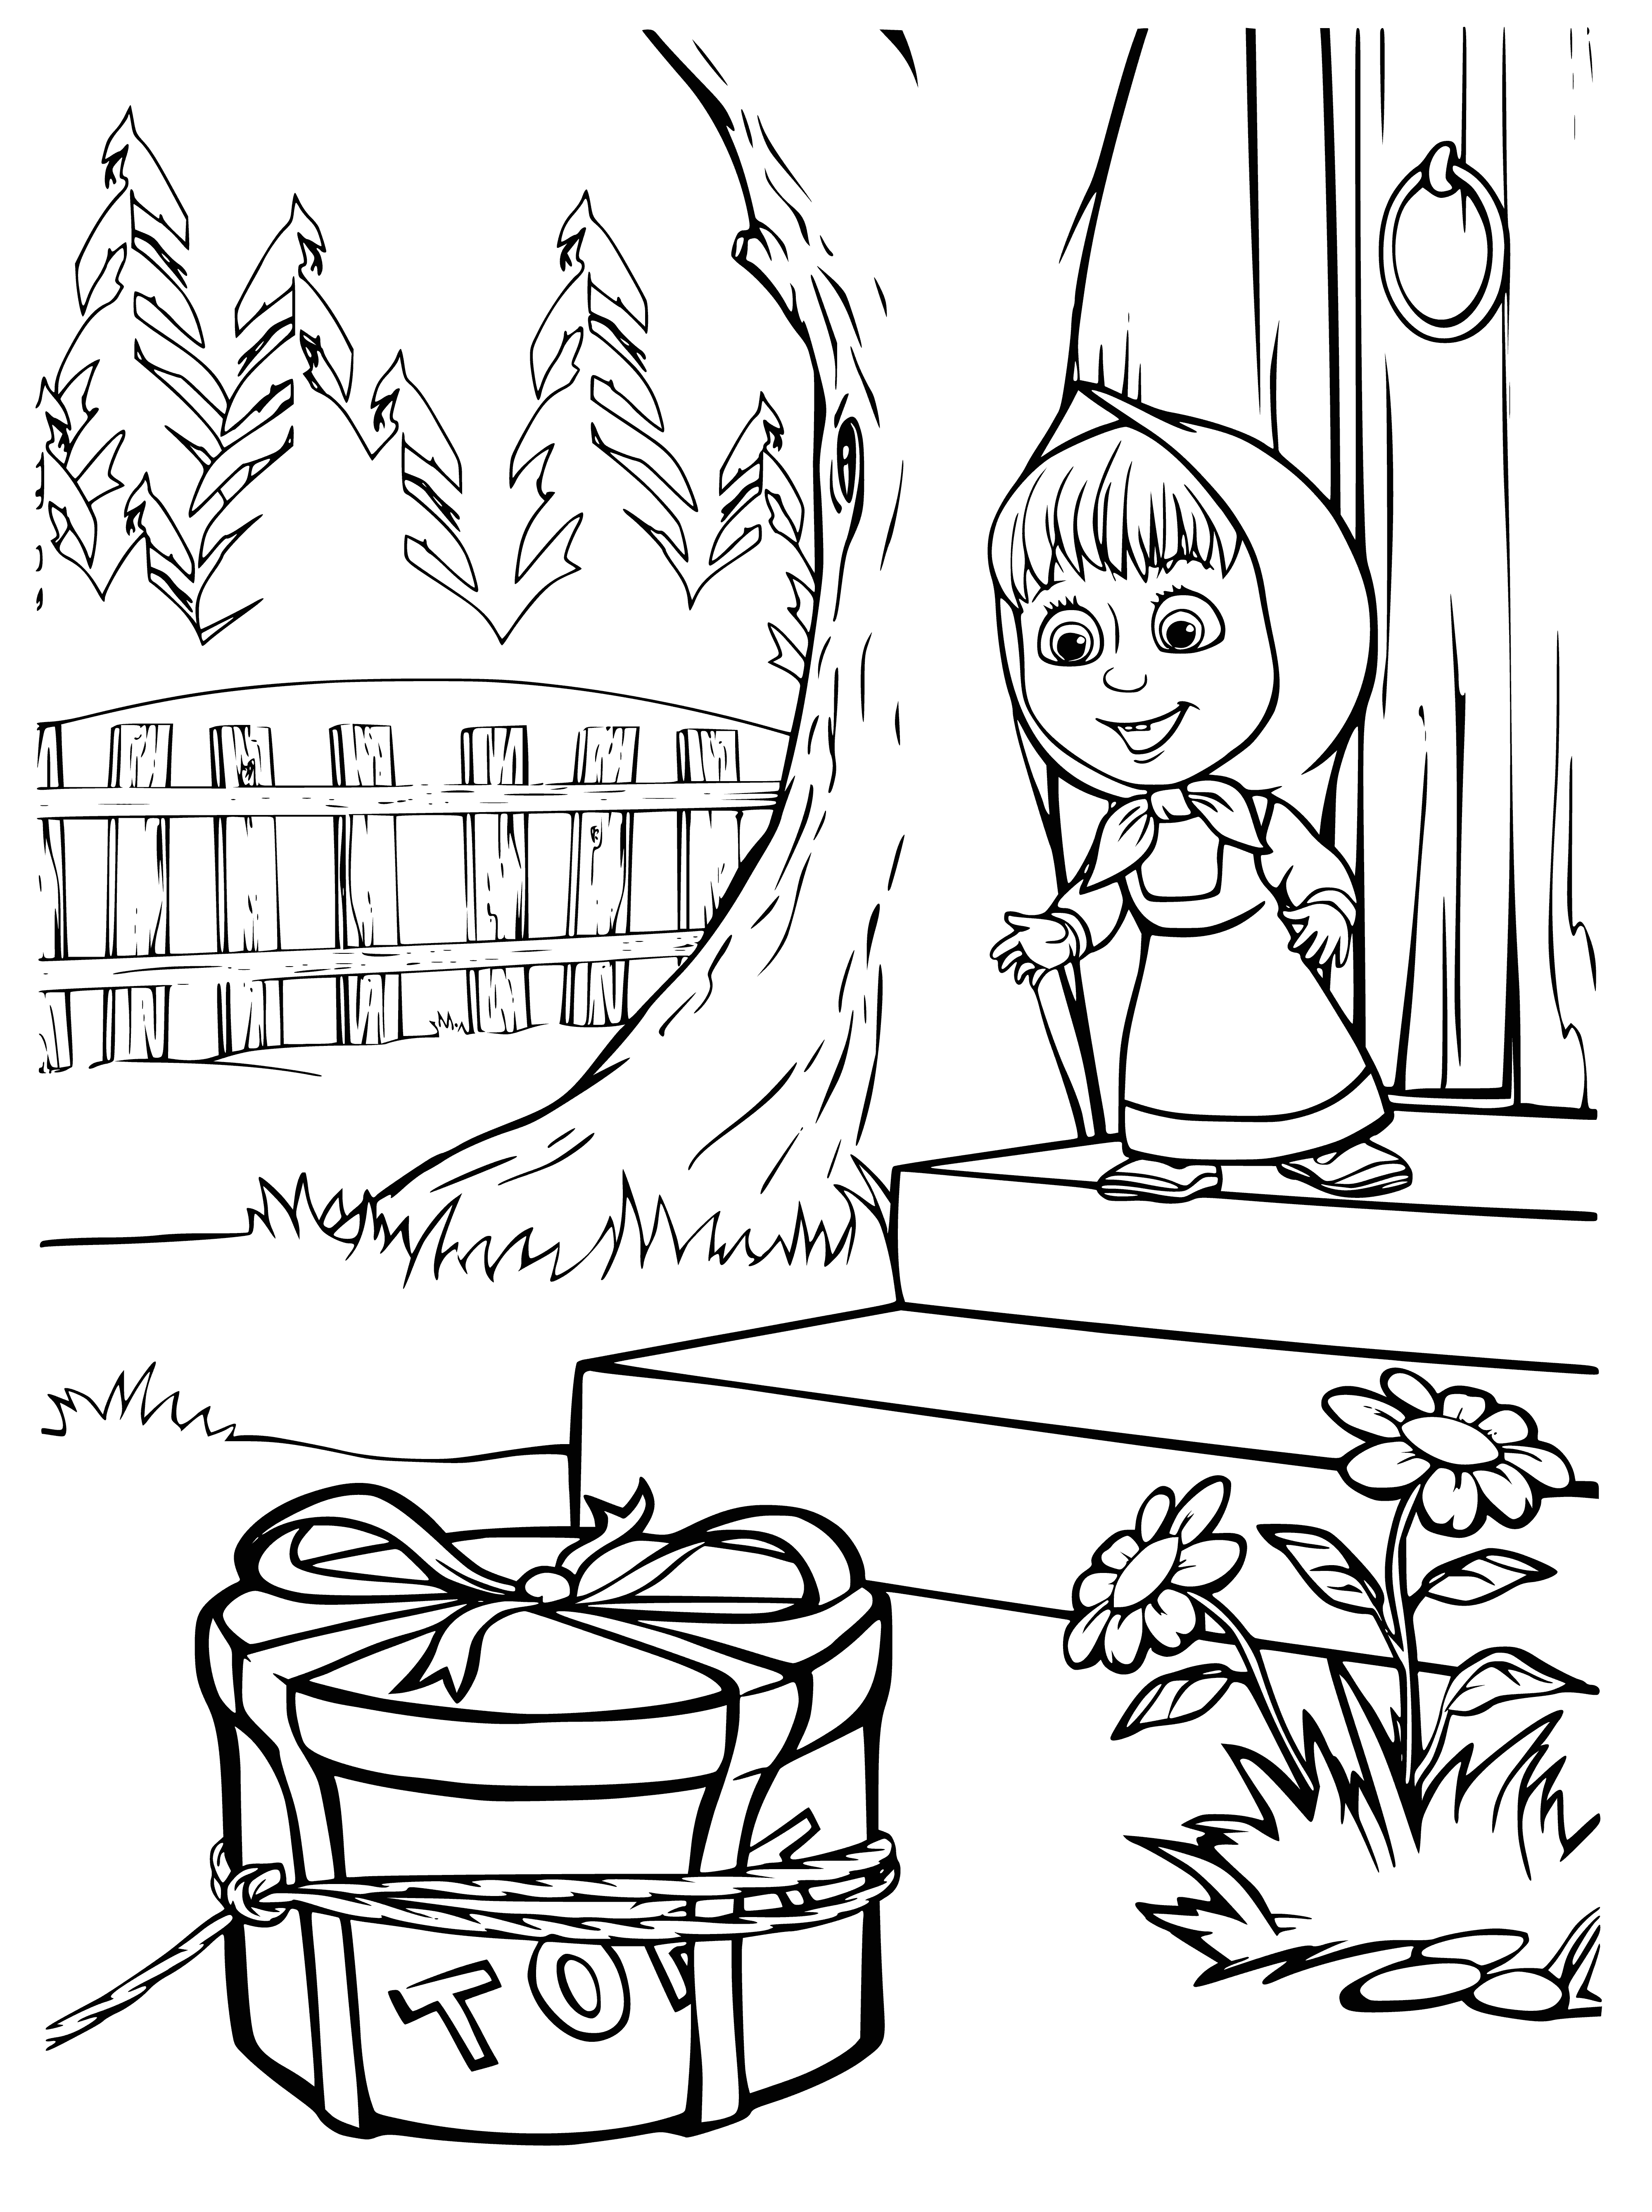 coloring page: Delighted teddy bears and party treats surround a celebratory cake: the perfect scene for a colorful birthday!